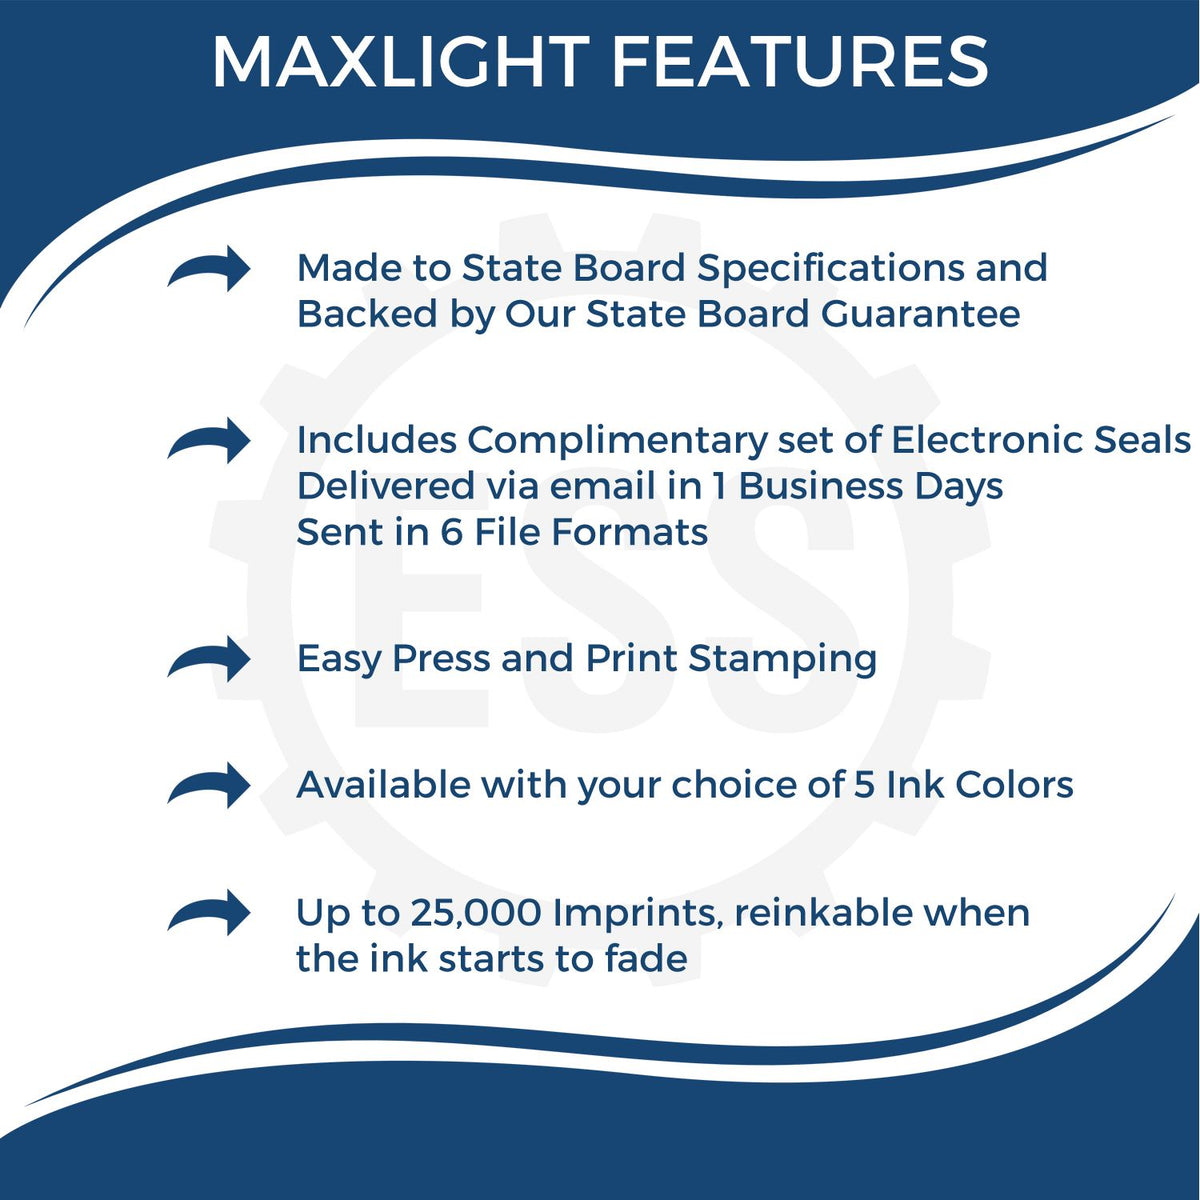 A picture of an infographic highlighting the selling points for the MaxLight Premium Pre-Inked Puerto Rico Rectangular Notarial Stamp